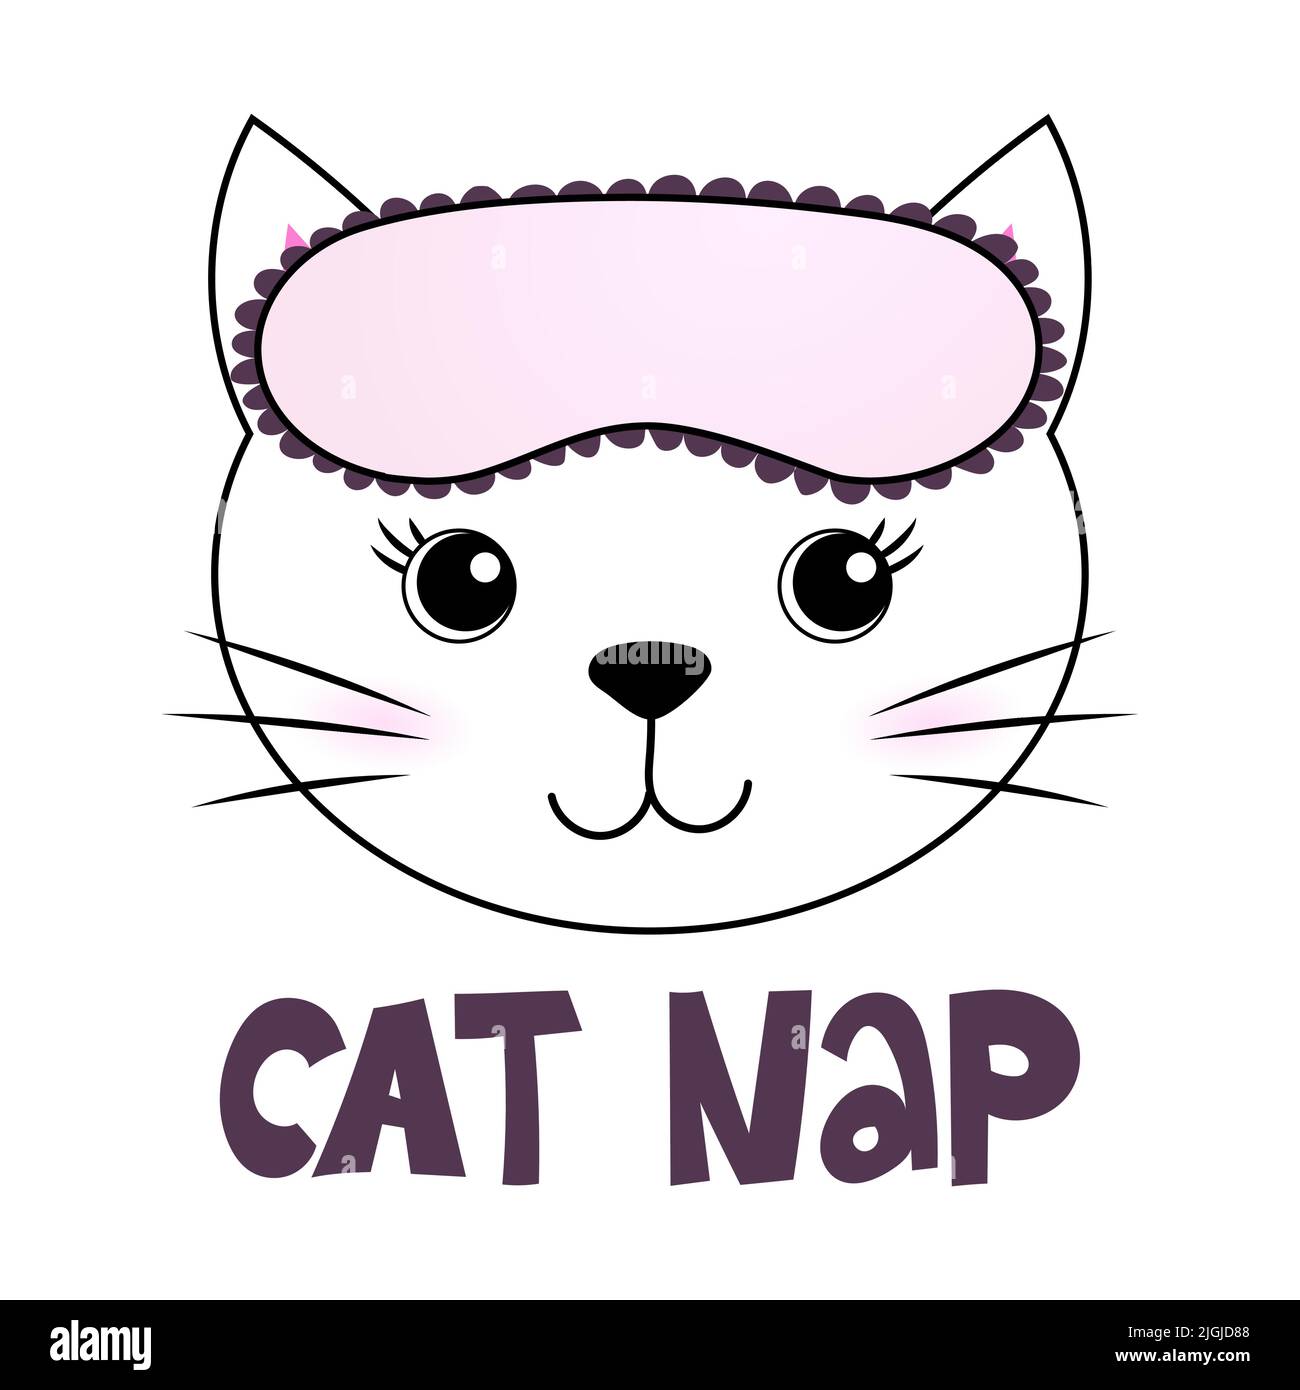 Cat nap - funny doodle, Cat with sleeping mask, stars, hearts. Cartoon background, texture for bedsheets, pajamas. Stock Vector